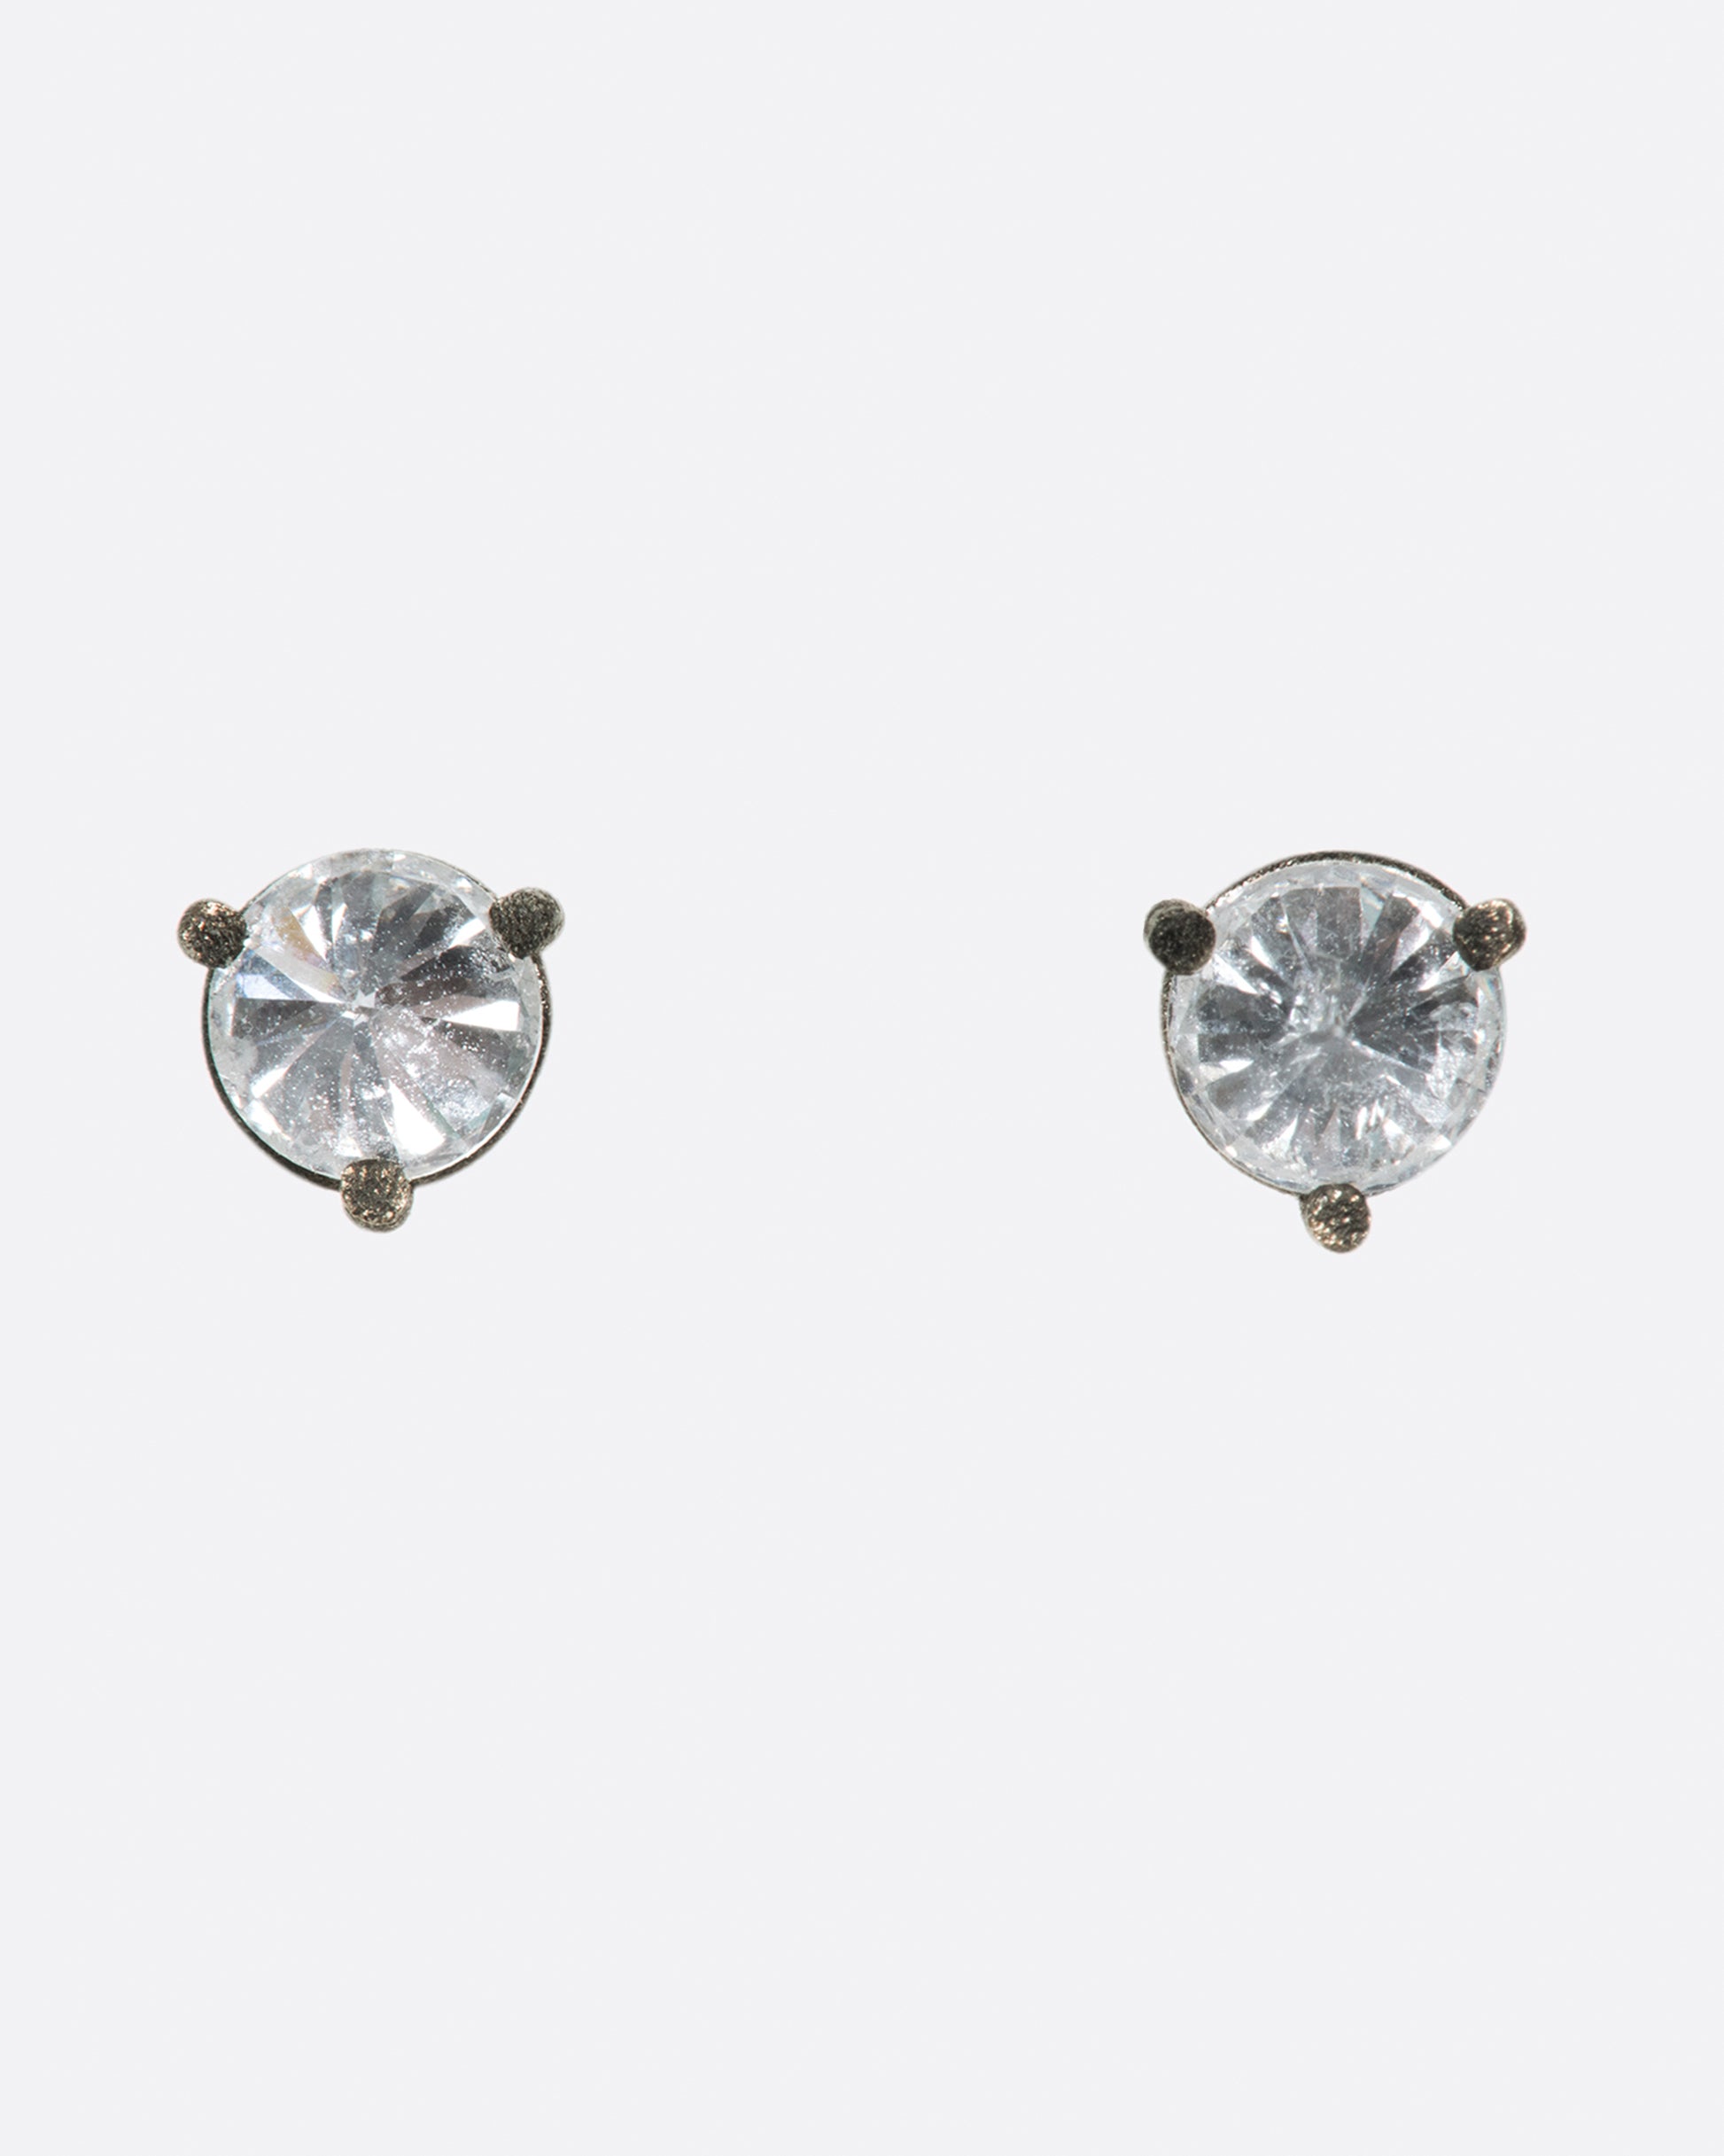 A pair of solitaire stud earrings with round inverted diamonds set in darkened white gold settings.